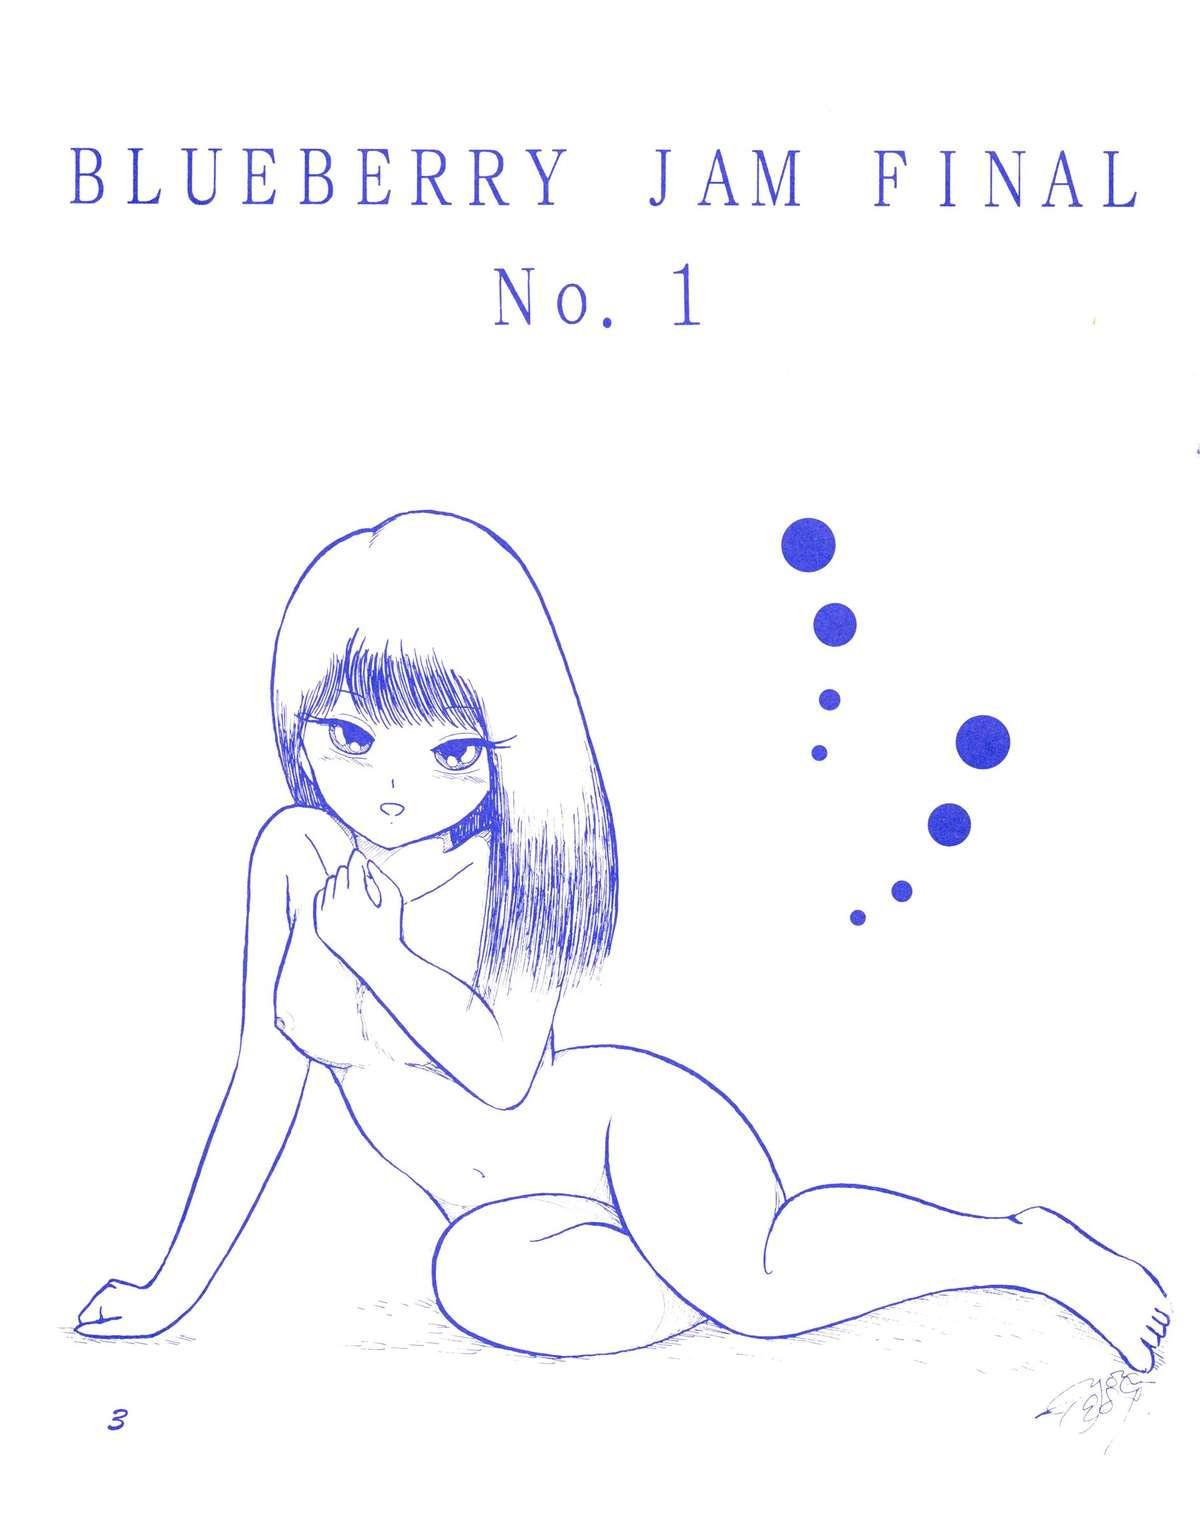 Shemale BLUEBERRY JAM FINAL No.1 - World masterpiece theater Princess sarah Foursome - Page 3